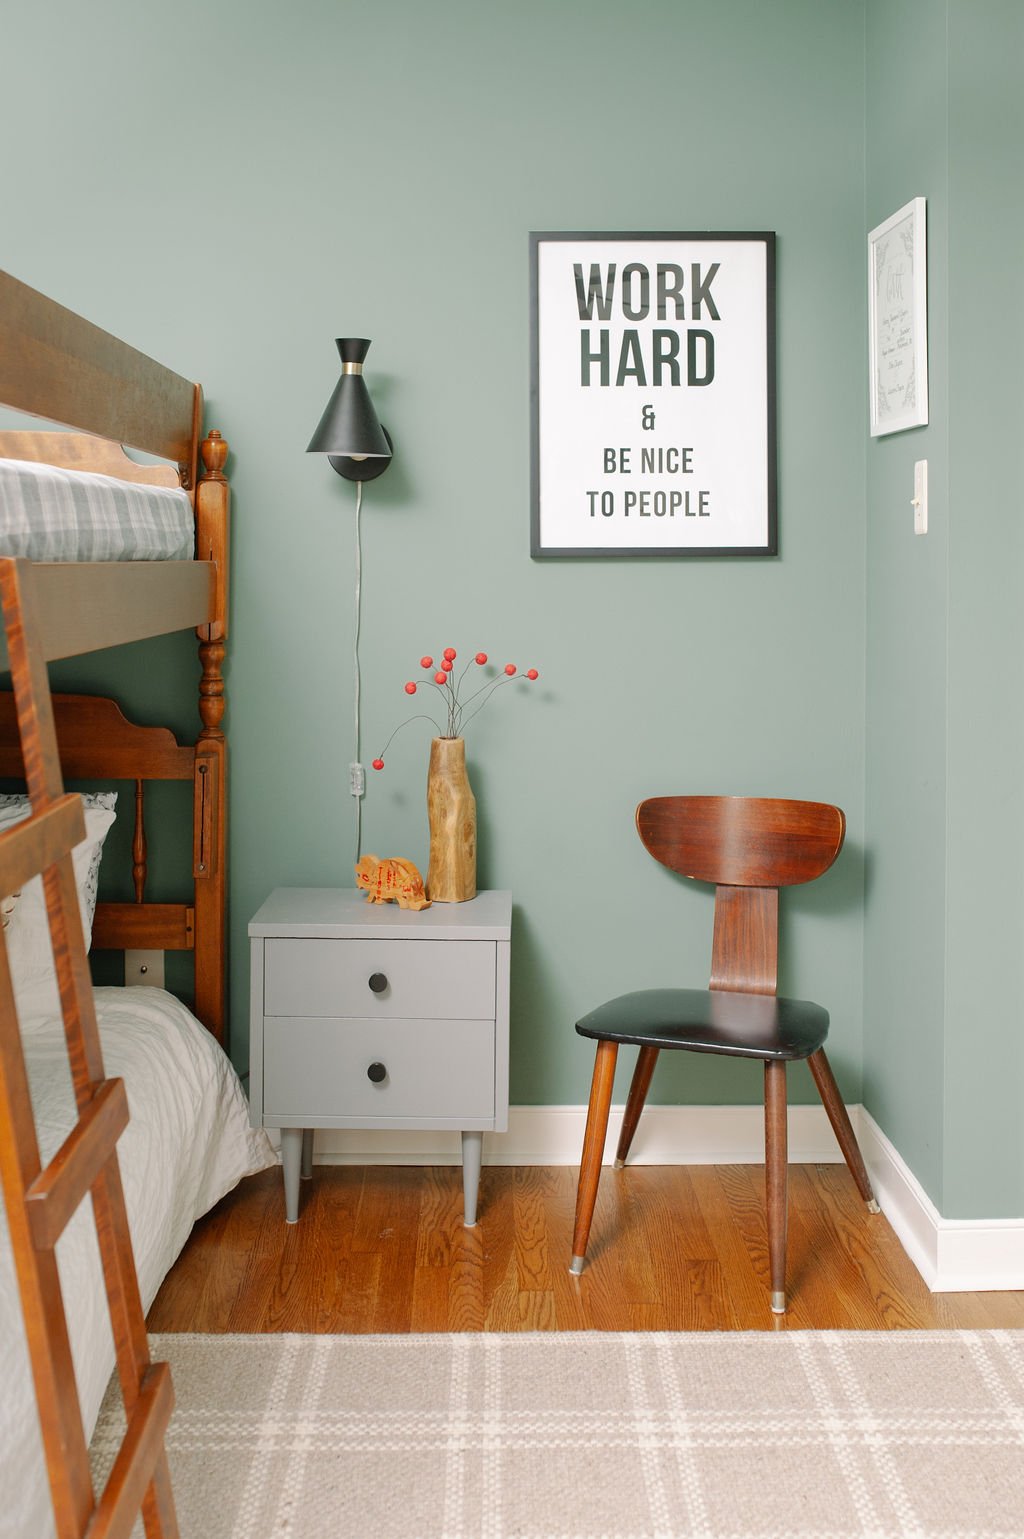 Little Boy's room in Sherwin Williams Privilege Green with Bunk Bed and Midcentury nightstand with Poster that says Work Hard & Be Nice to People